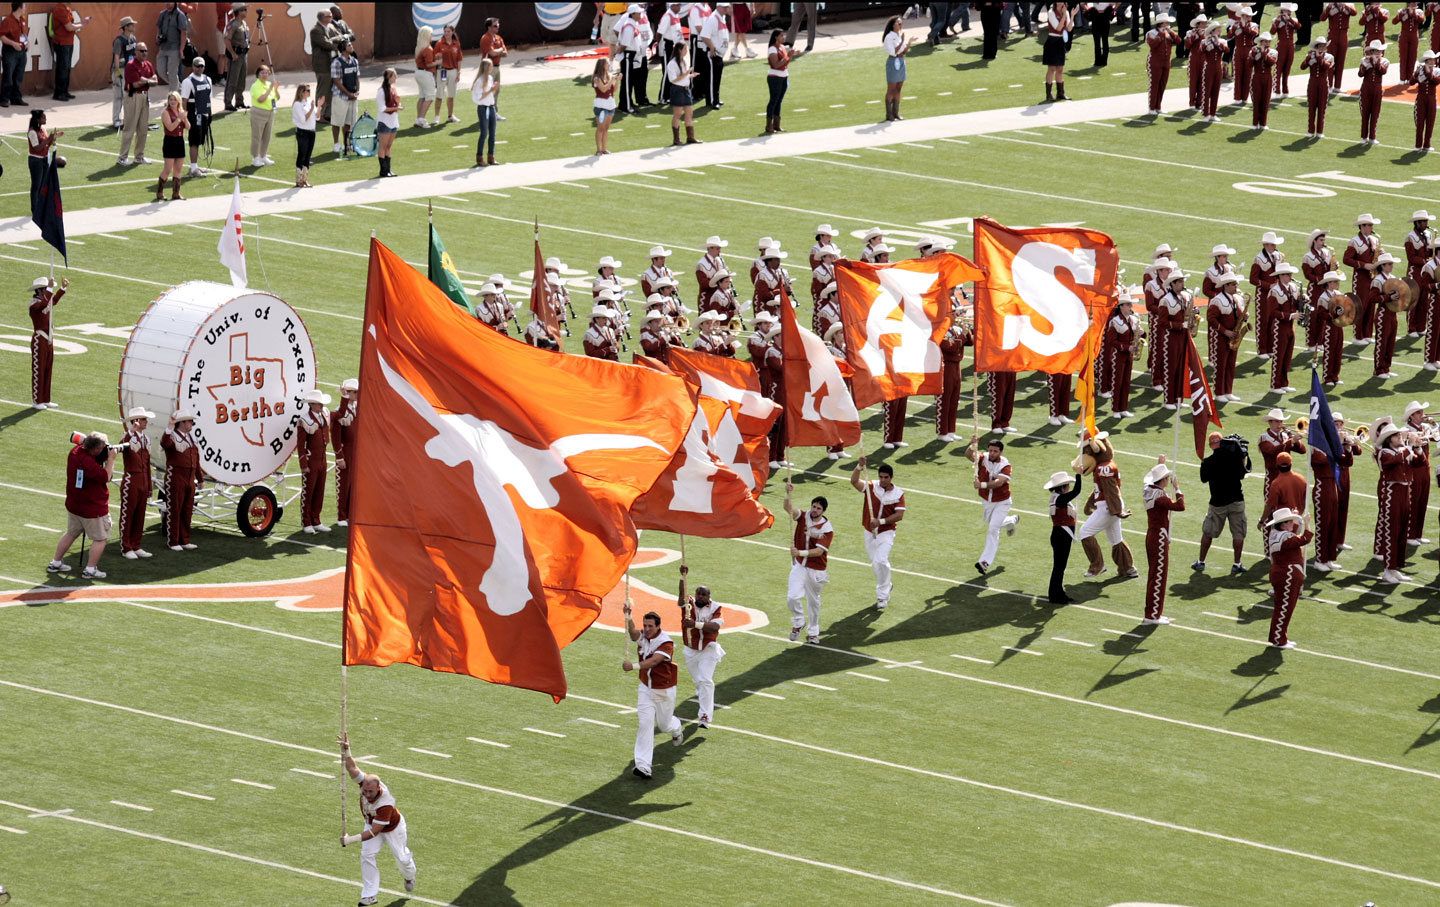 Old Boy Longhorns vs. Neoliberal Pirates: The State of Sports at the University of Texas